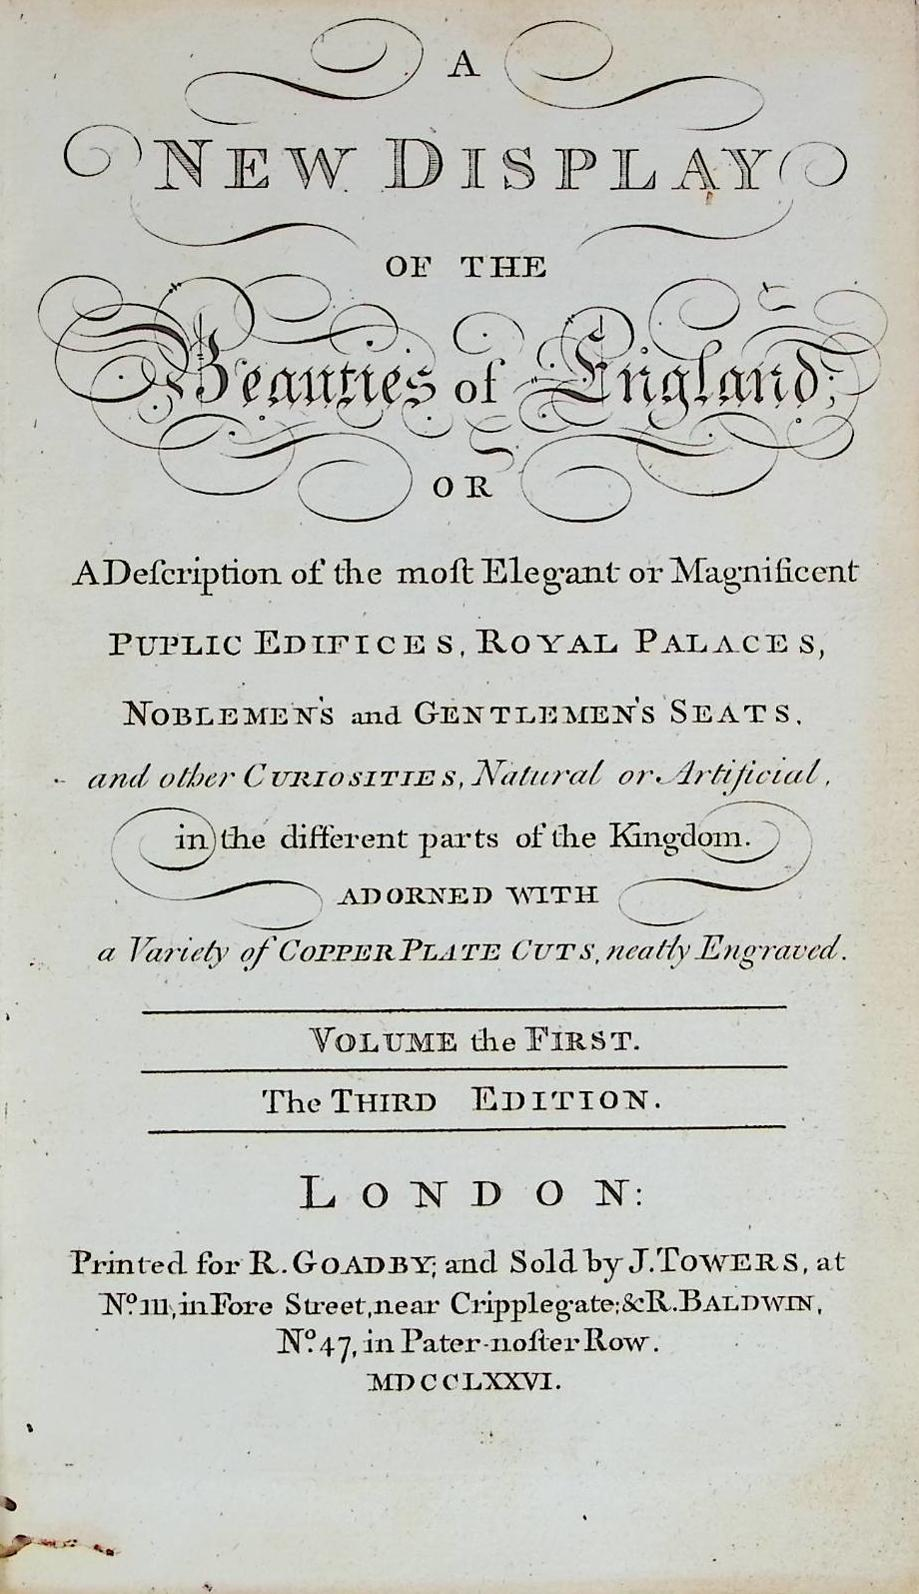 A New Display of the Beauties of England; or a Description of the Most Elegant or Magnificent Public Edifices, Royal Palaces, Noblemen's and Gentlemen's Seats, and Other Curiosities, Natural or Artificial in the Different Parts of the Kingdom.